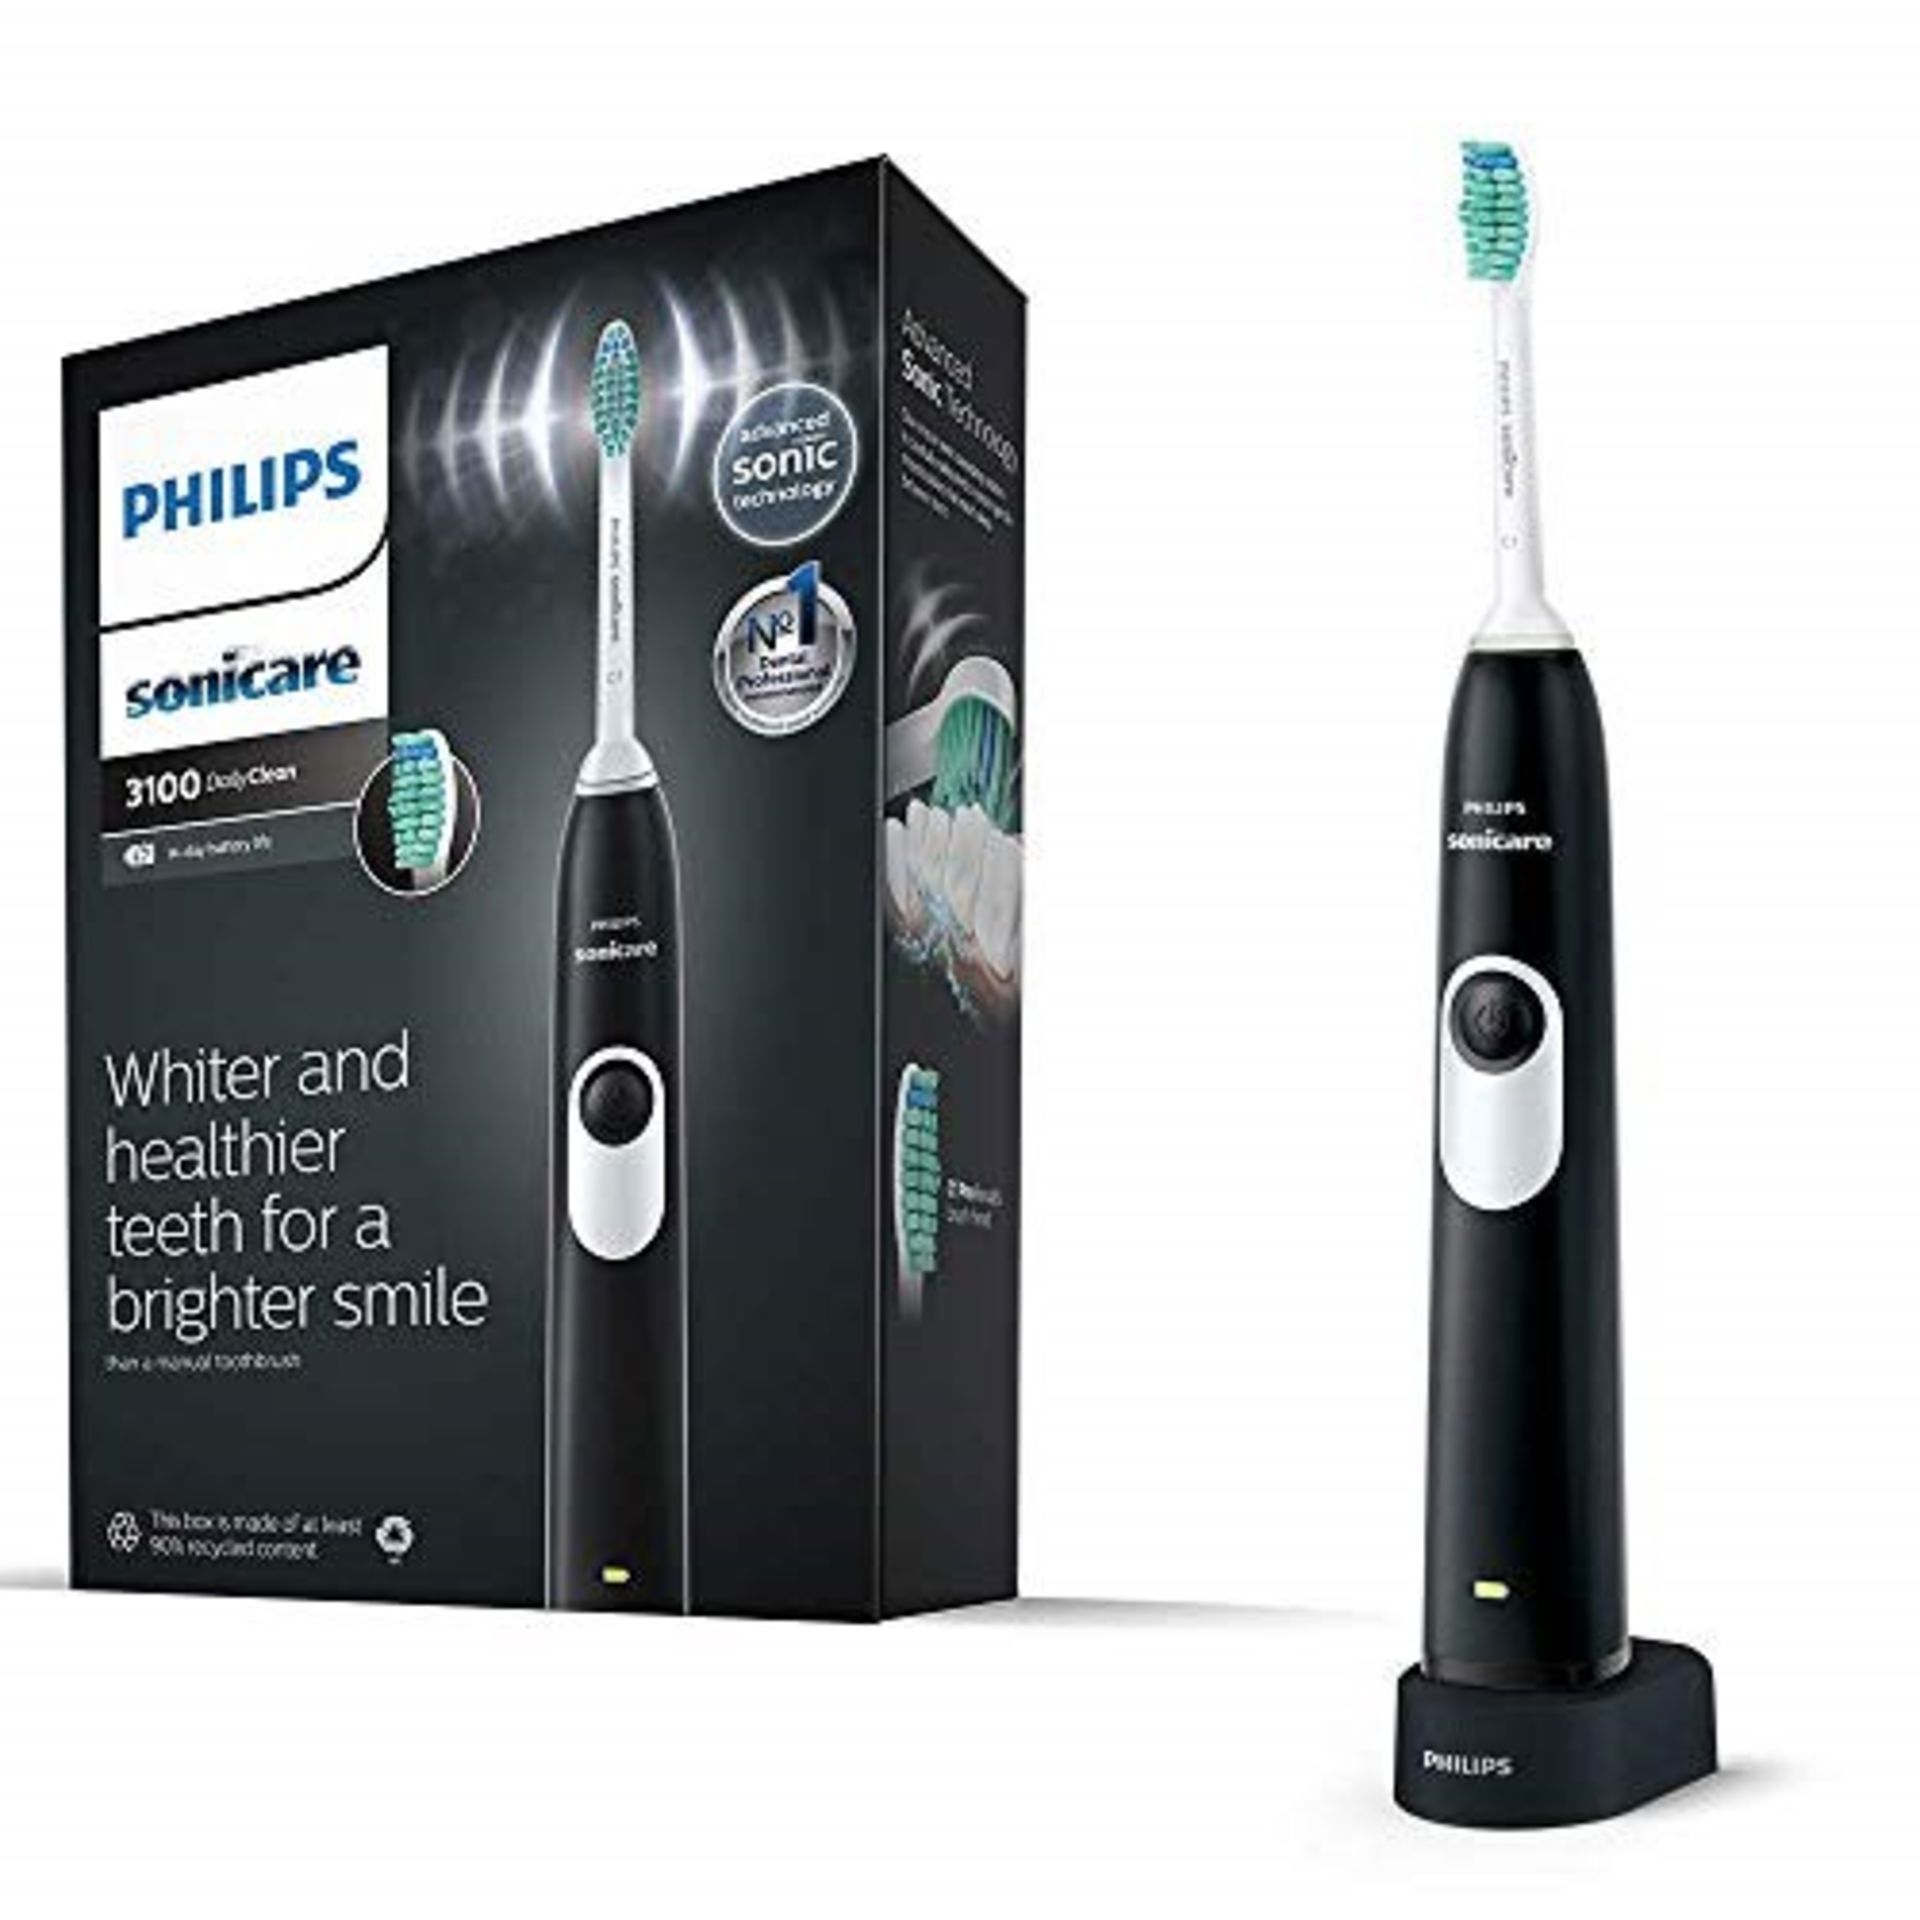 Philips Sonicare DailyClean 3100 Electric Toothbrush, Black ProResults Brush Head (UK